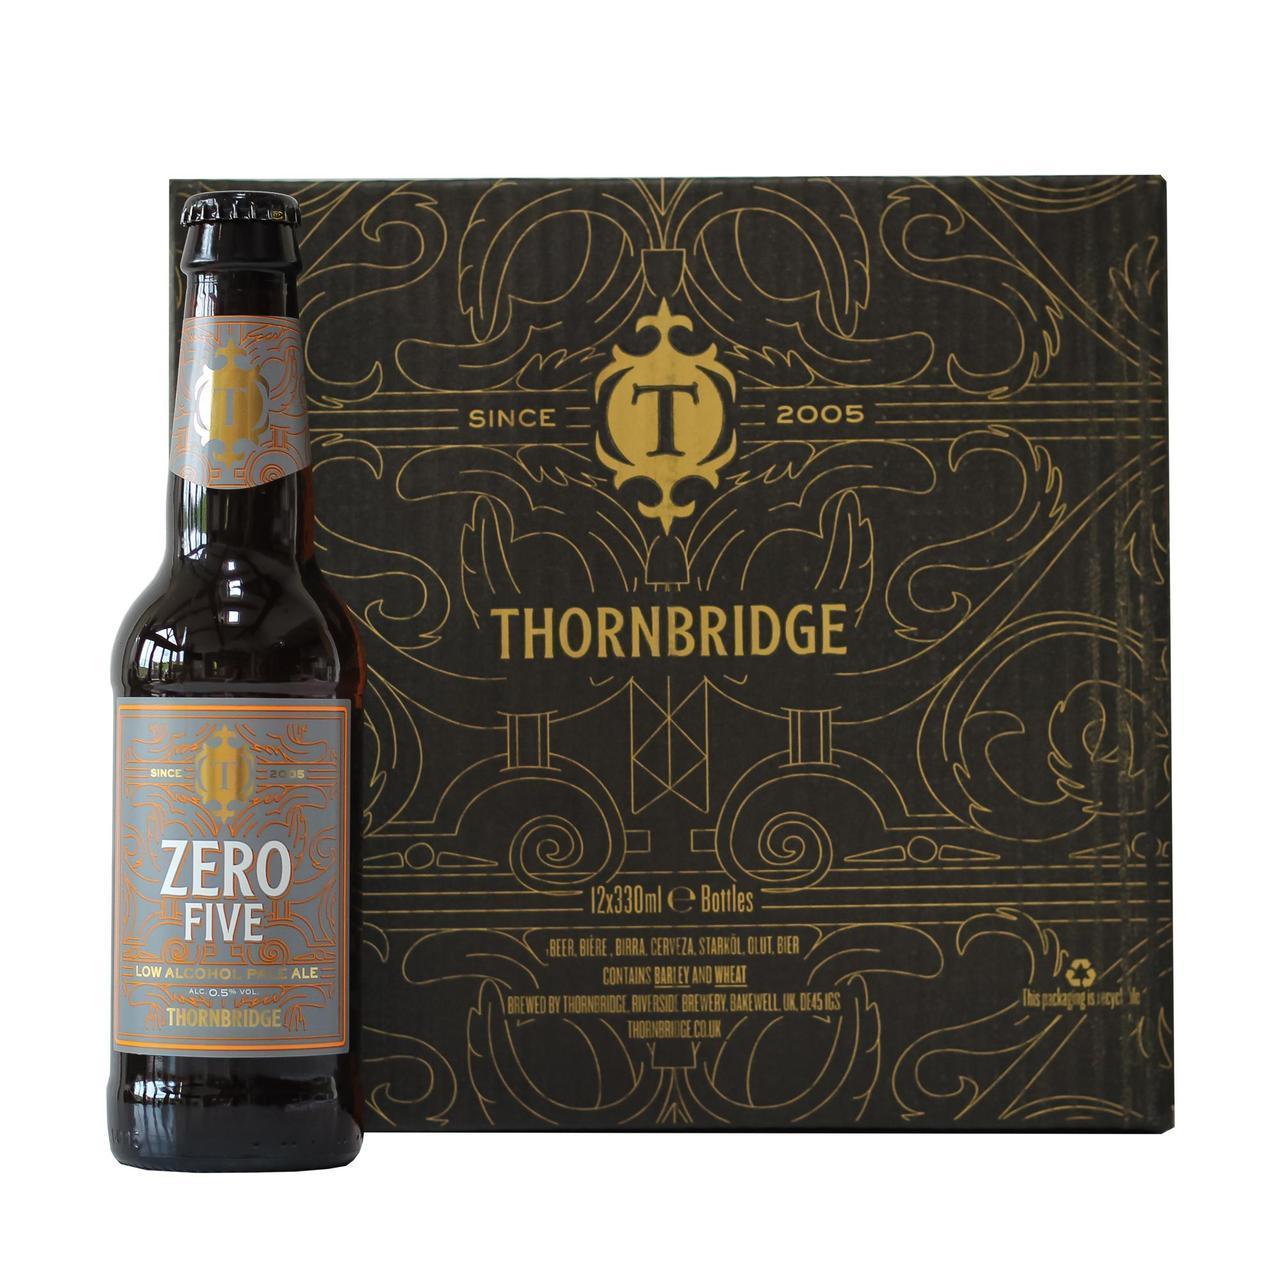 A bottle of Thornbridge Zero FIve low-alcohol beer with 12-pack box